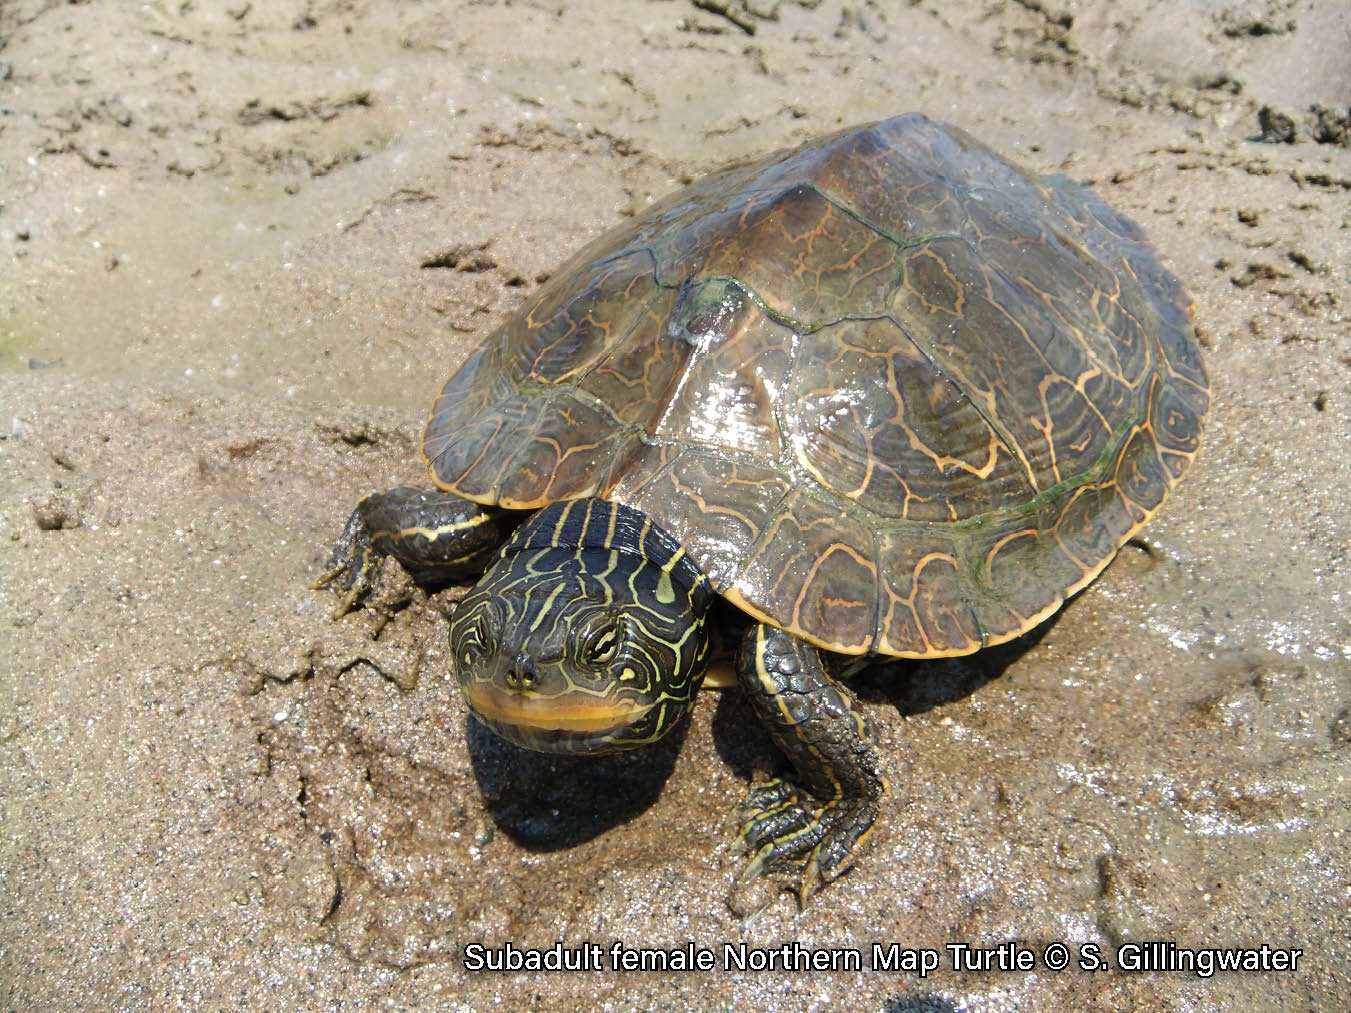 Picture of a subadult female Northern Map Turtle. The turtle has a brown shell with a yellow contour line pattern, a ridge down the midline of its shell, and the back edge is serrated. It has yellow lines on its neck and a yellow spot behind its eye.